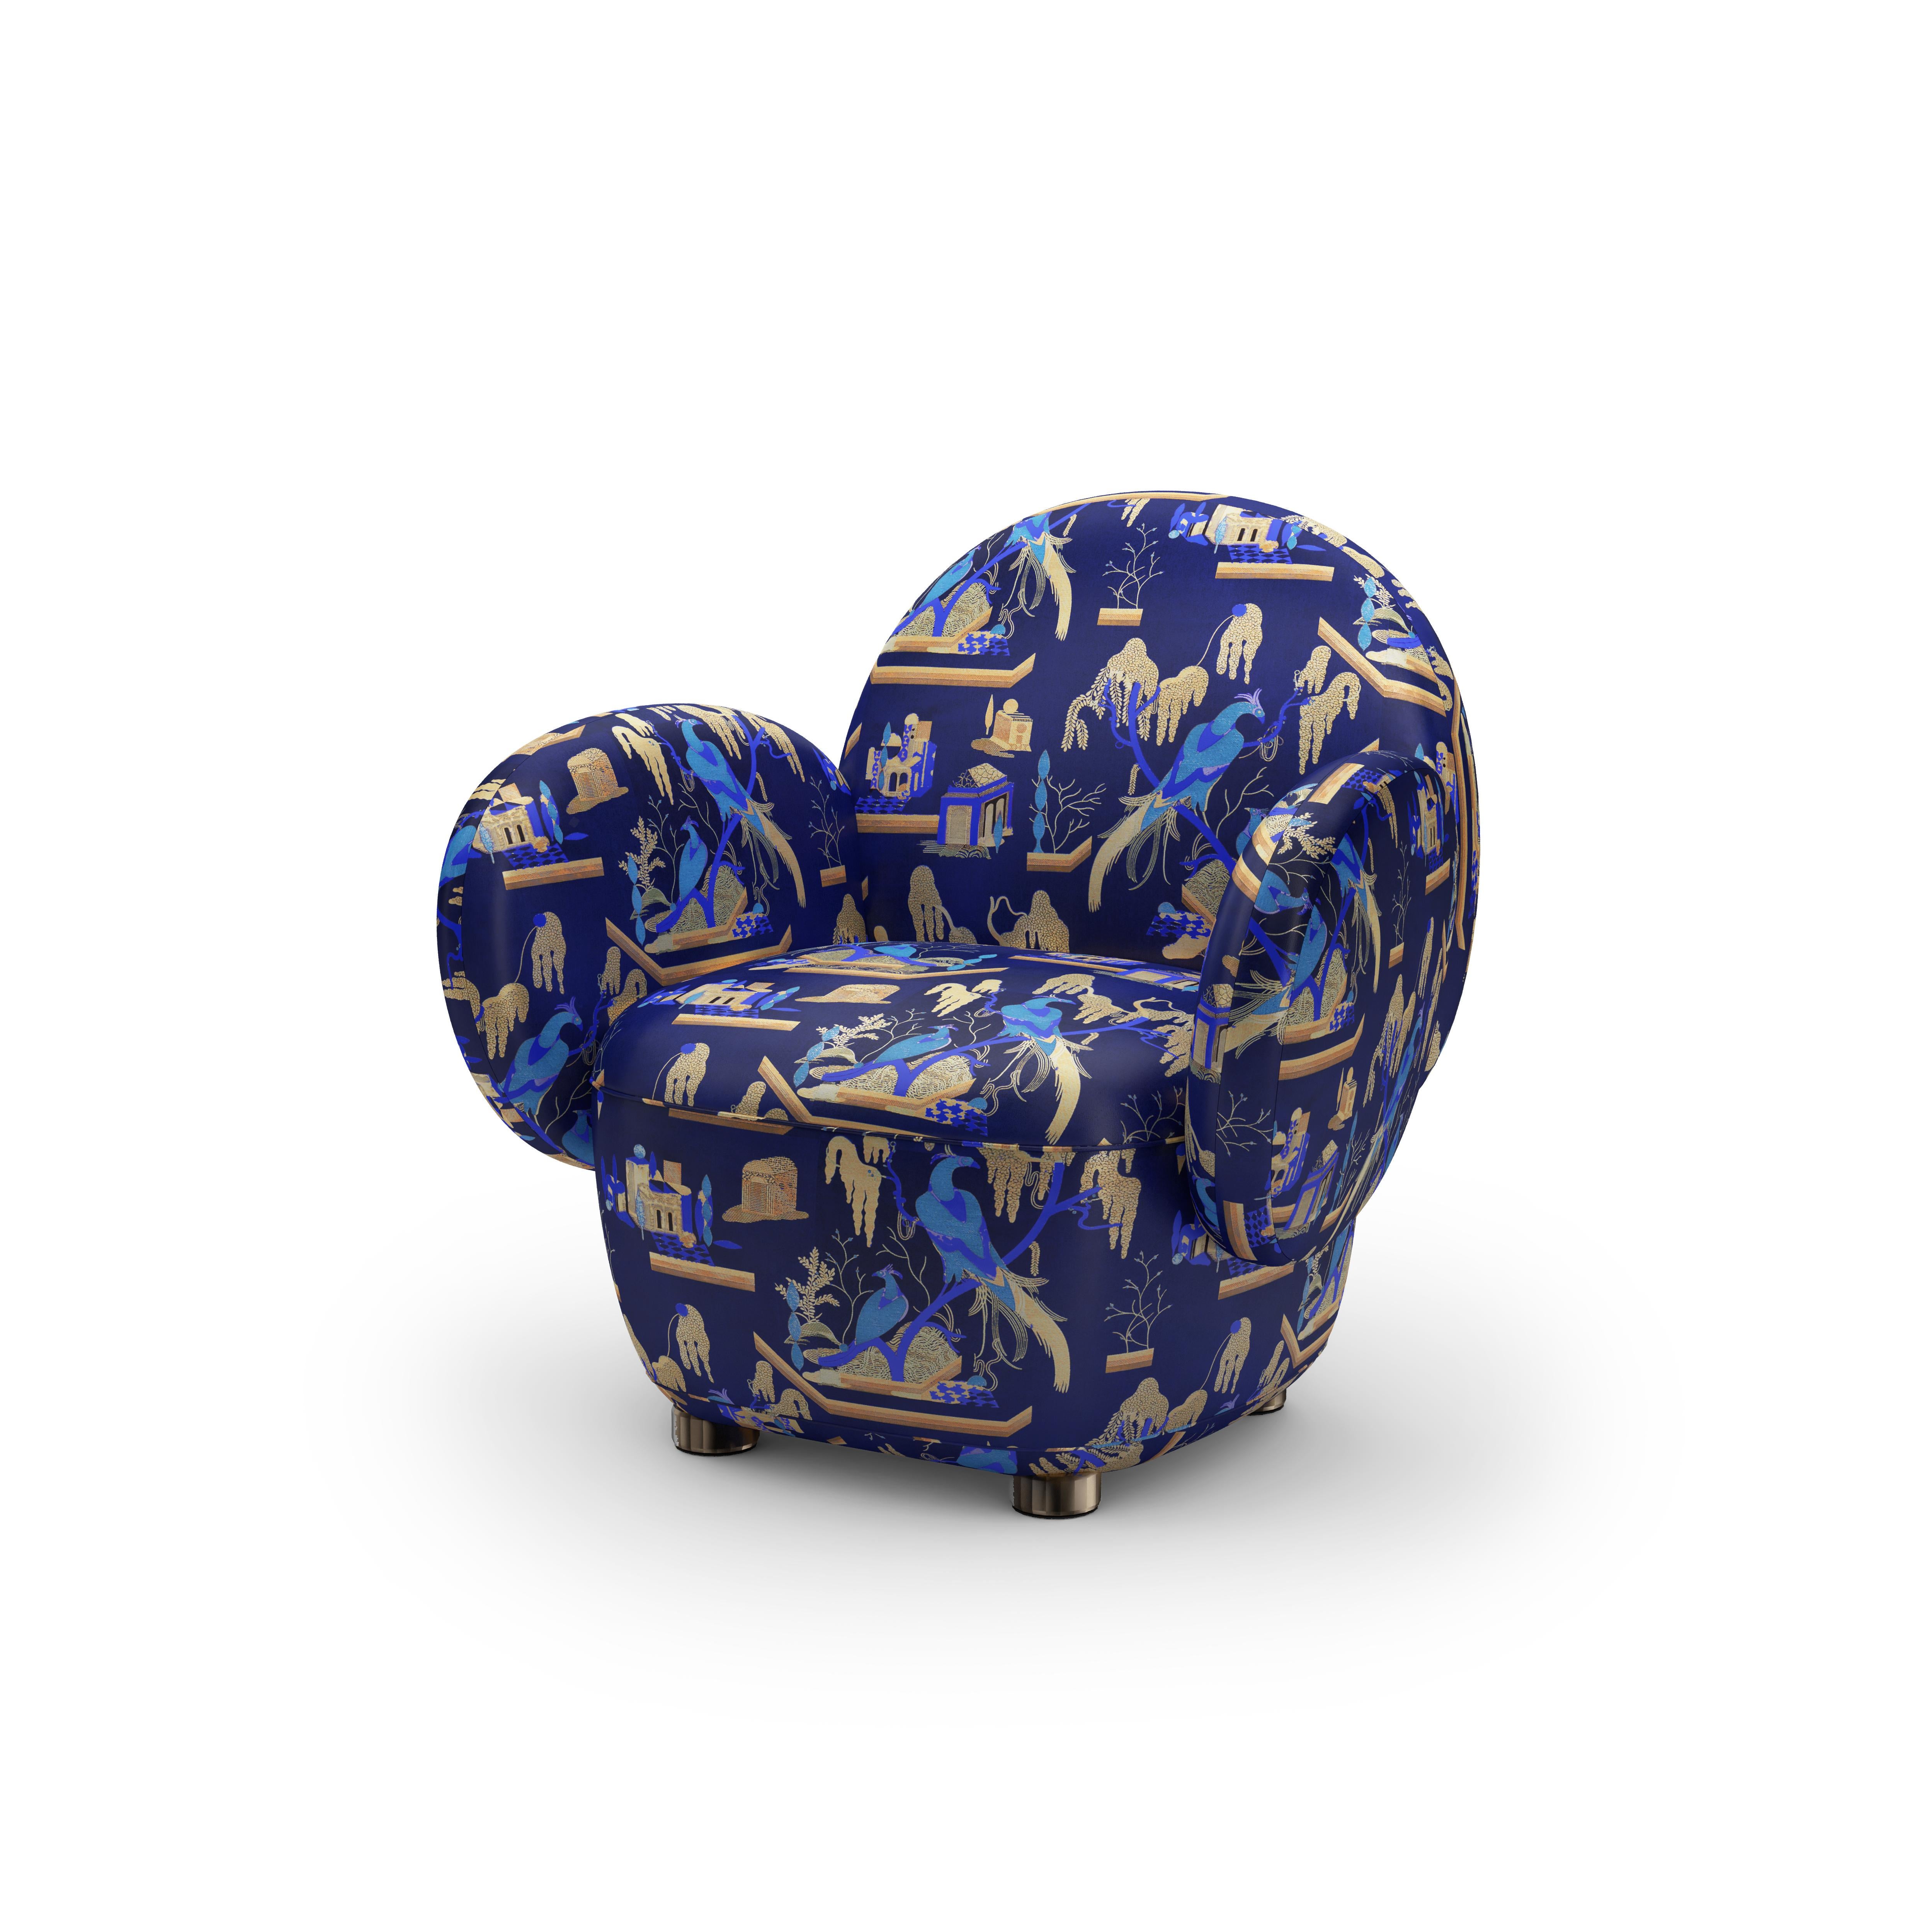 Dolce Armchair is an exquisite single seater sofa, which can be used on its own or with the Dolce Sofa. Its upholstered in the plush blue jacquard fabric, This Must Be The Place by Dedar Milano. Ideal for playful lazing! Designed by Matteo